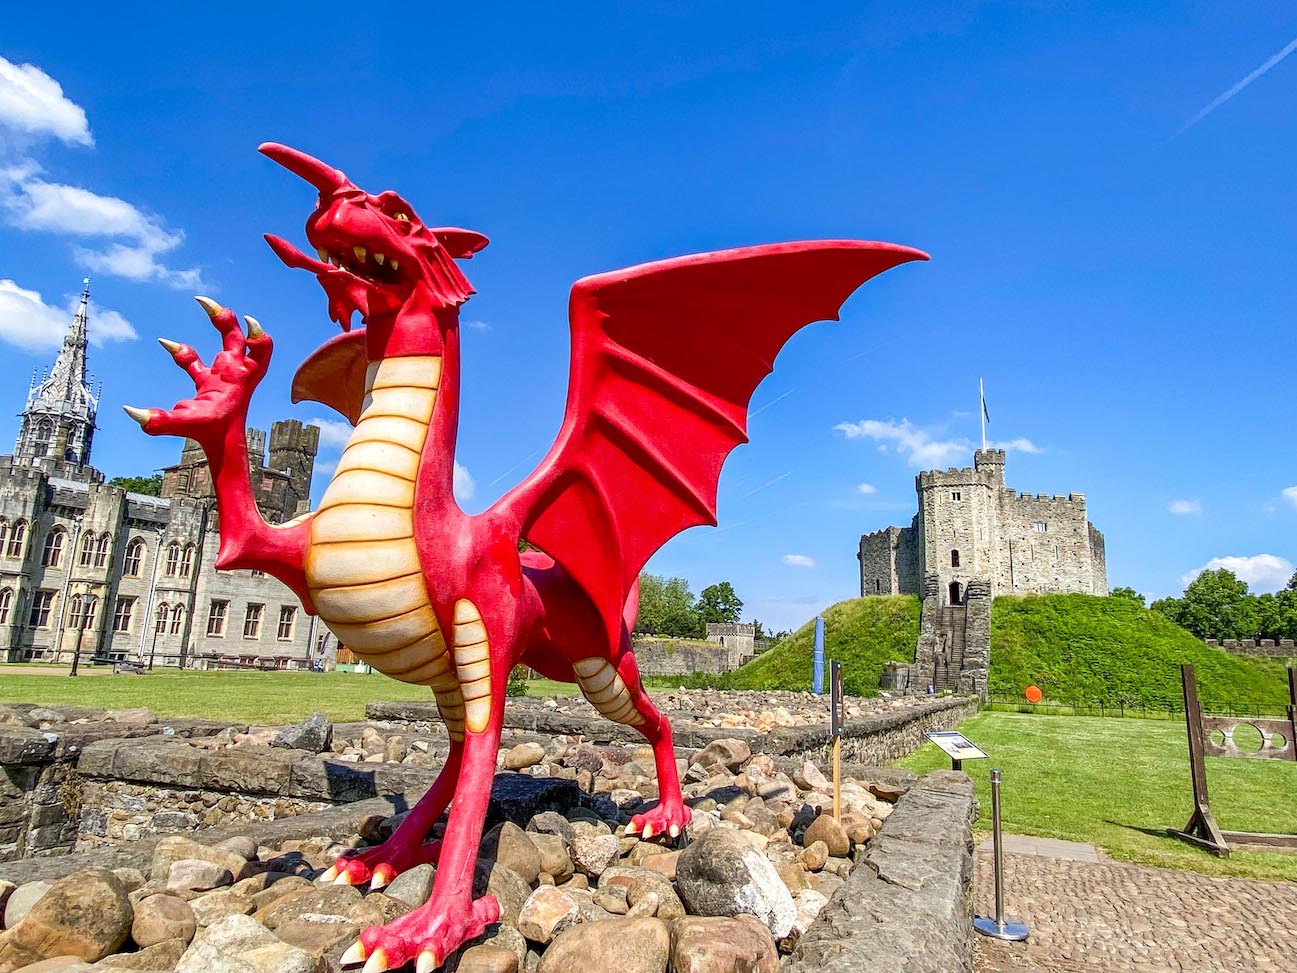 Places to visit in South Wales, Cardiff Castle